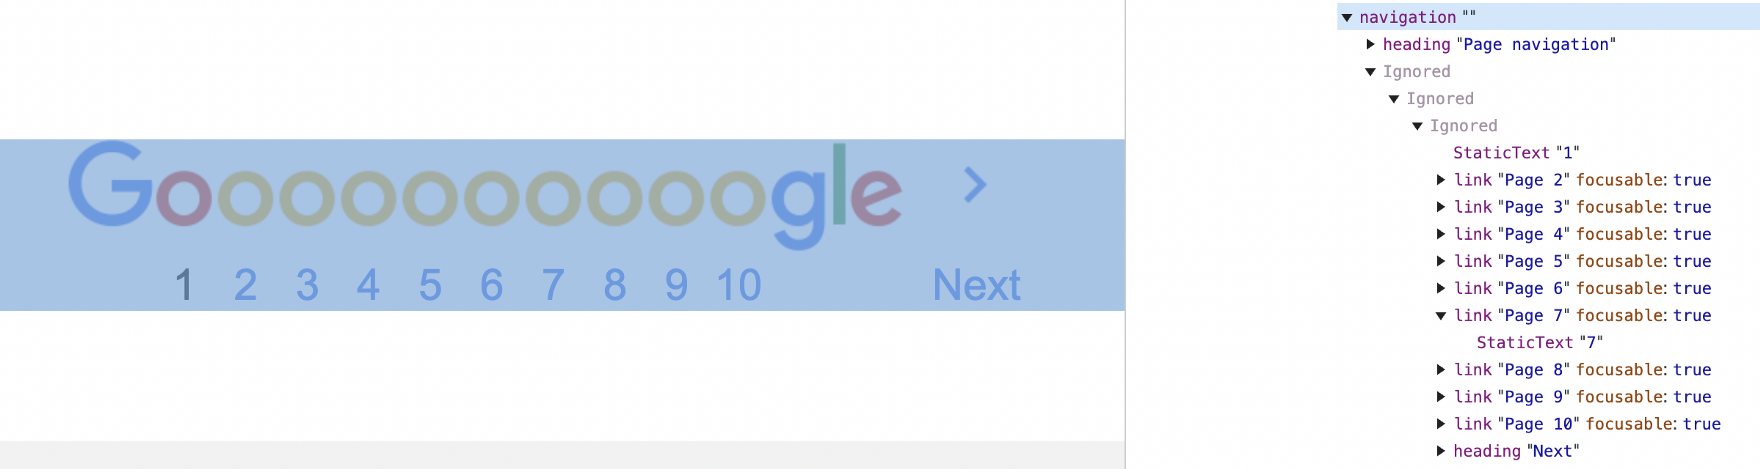 A screenshot of the “Goooooooogle” graphic in Google's pagination, side by side with its accessibility tree showing a simple list of links to pages.